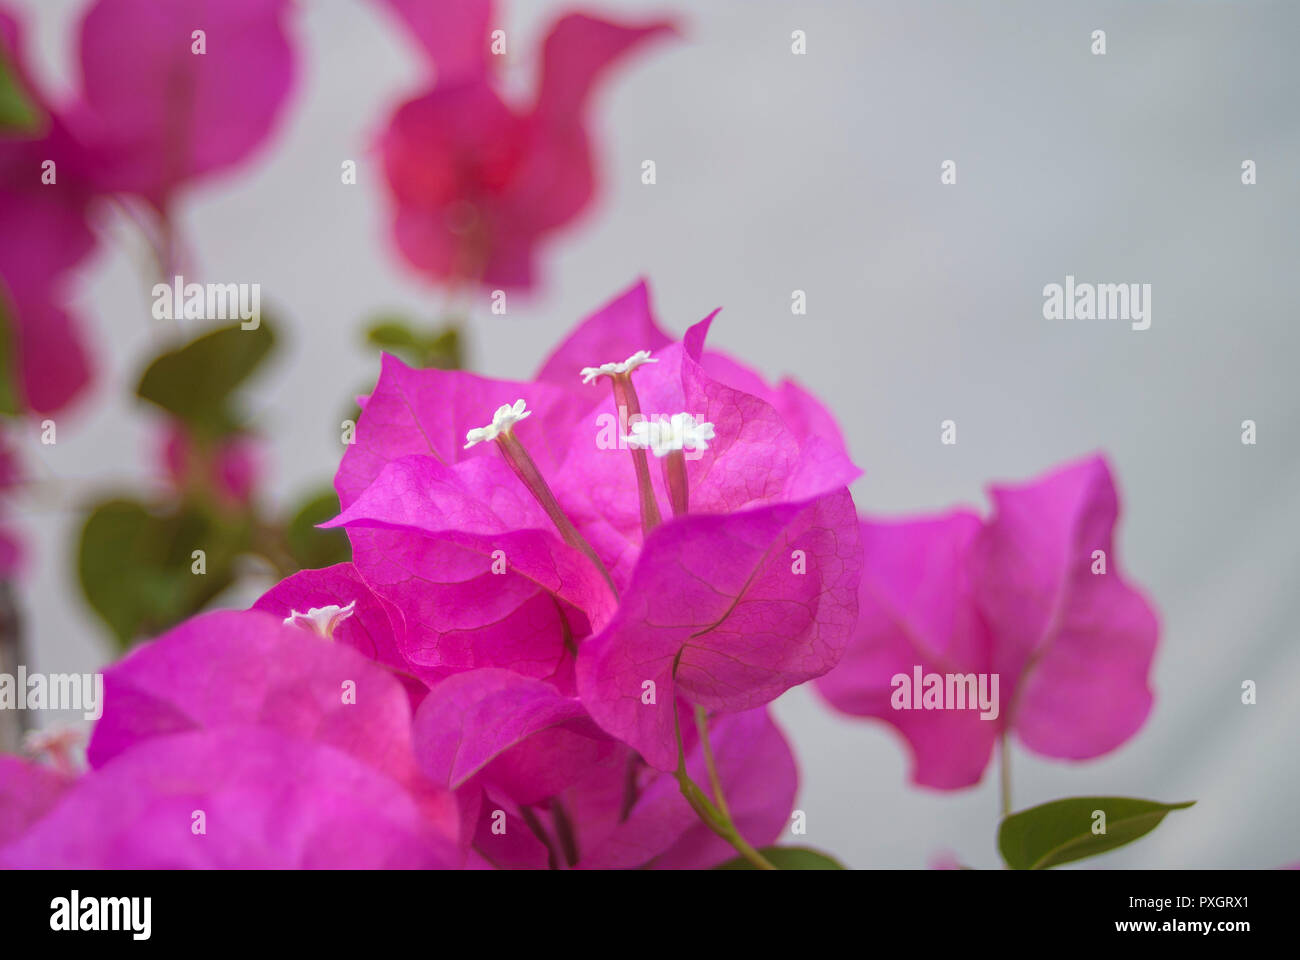 Bougainvillea Sale High Resolution Stock Photography And Images Alamy